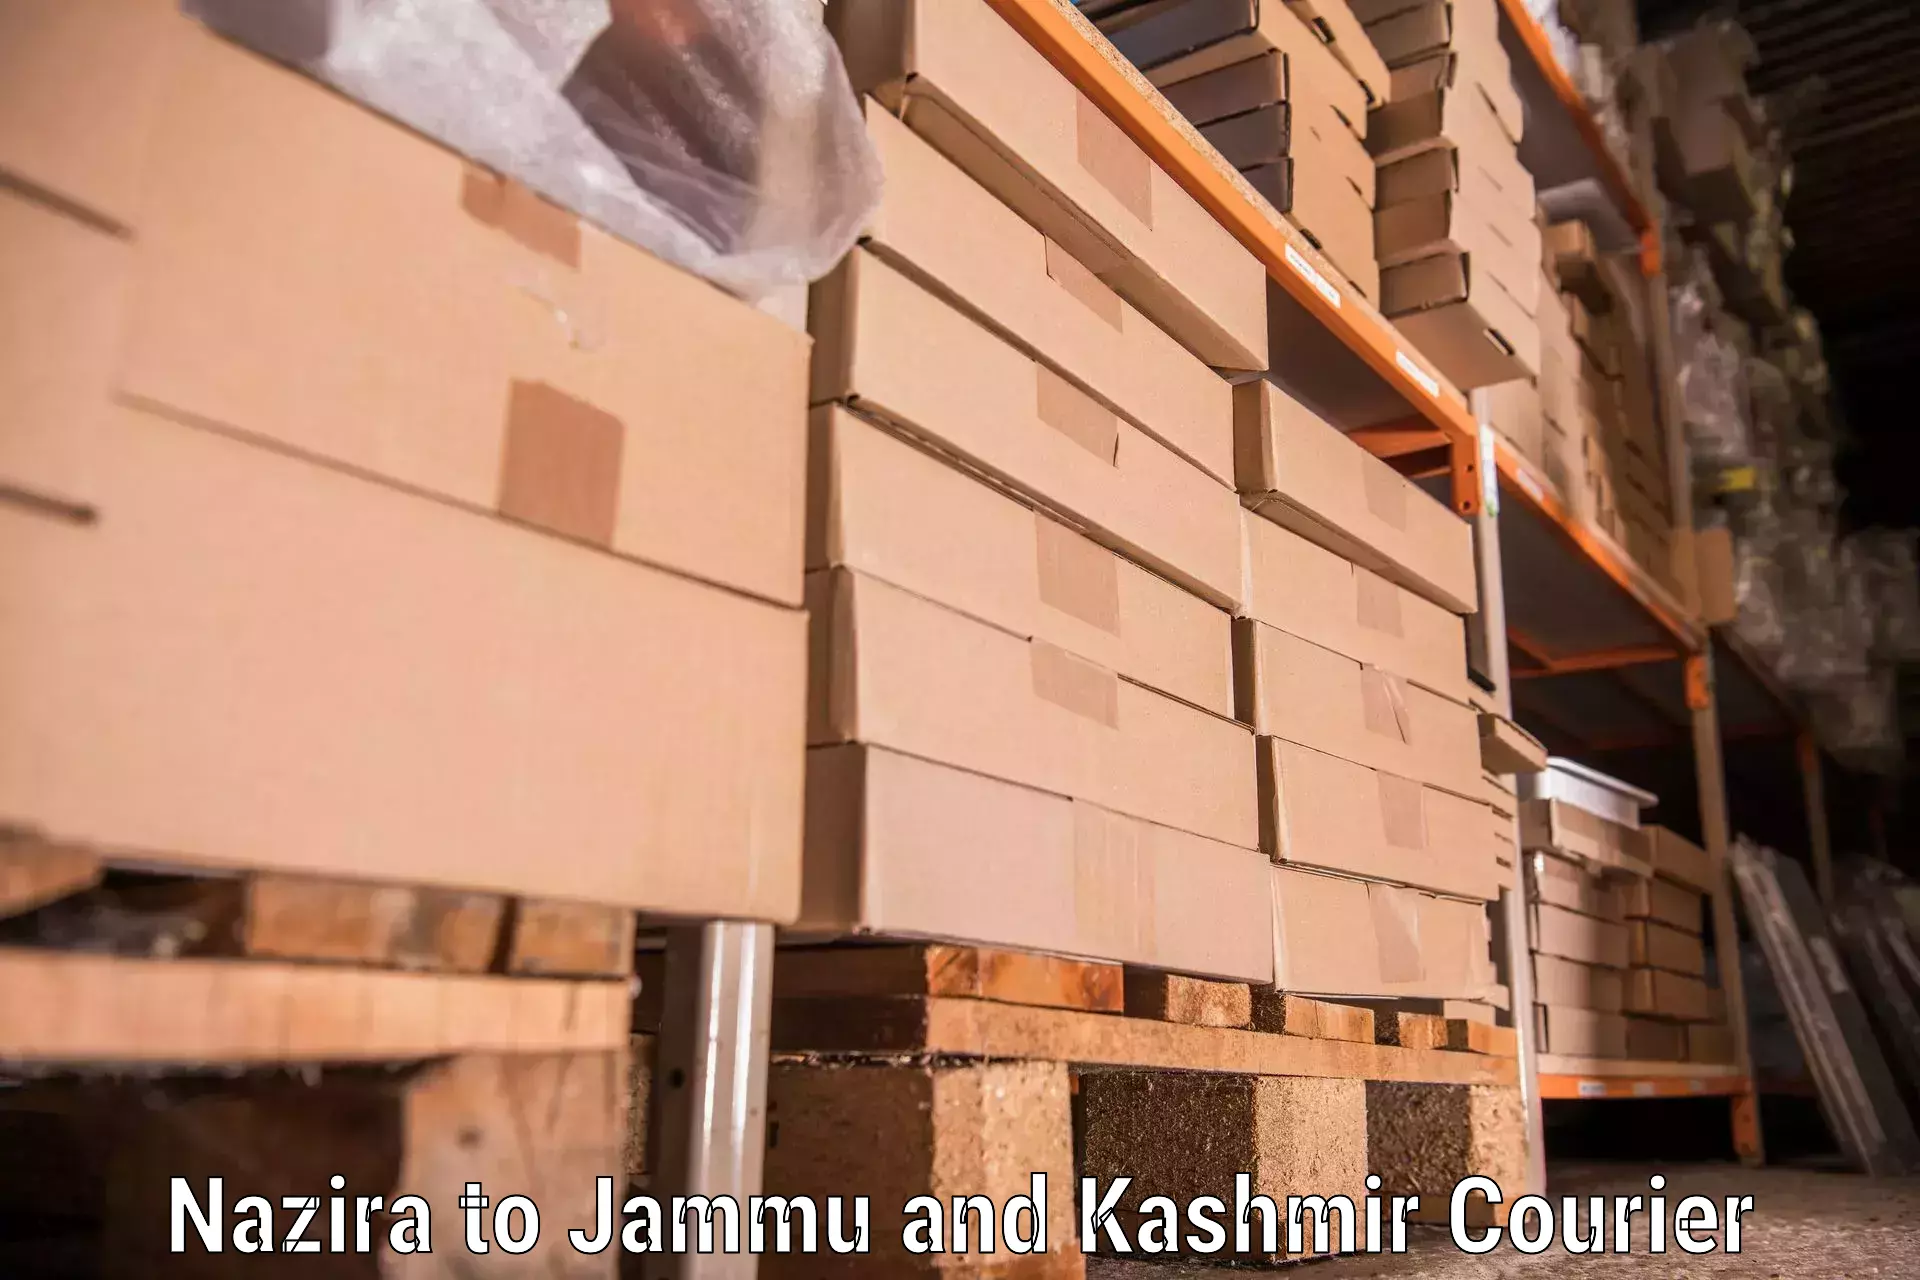 Moving service excellence Nazira to Jammu and Kashmir